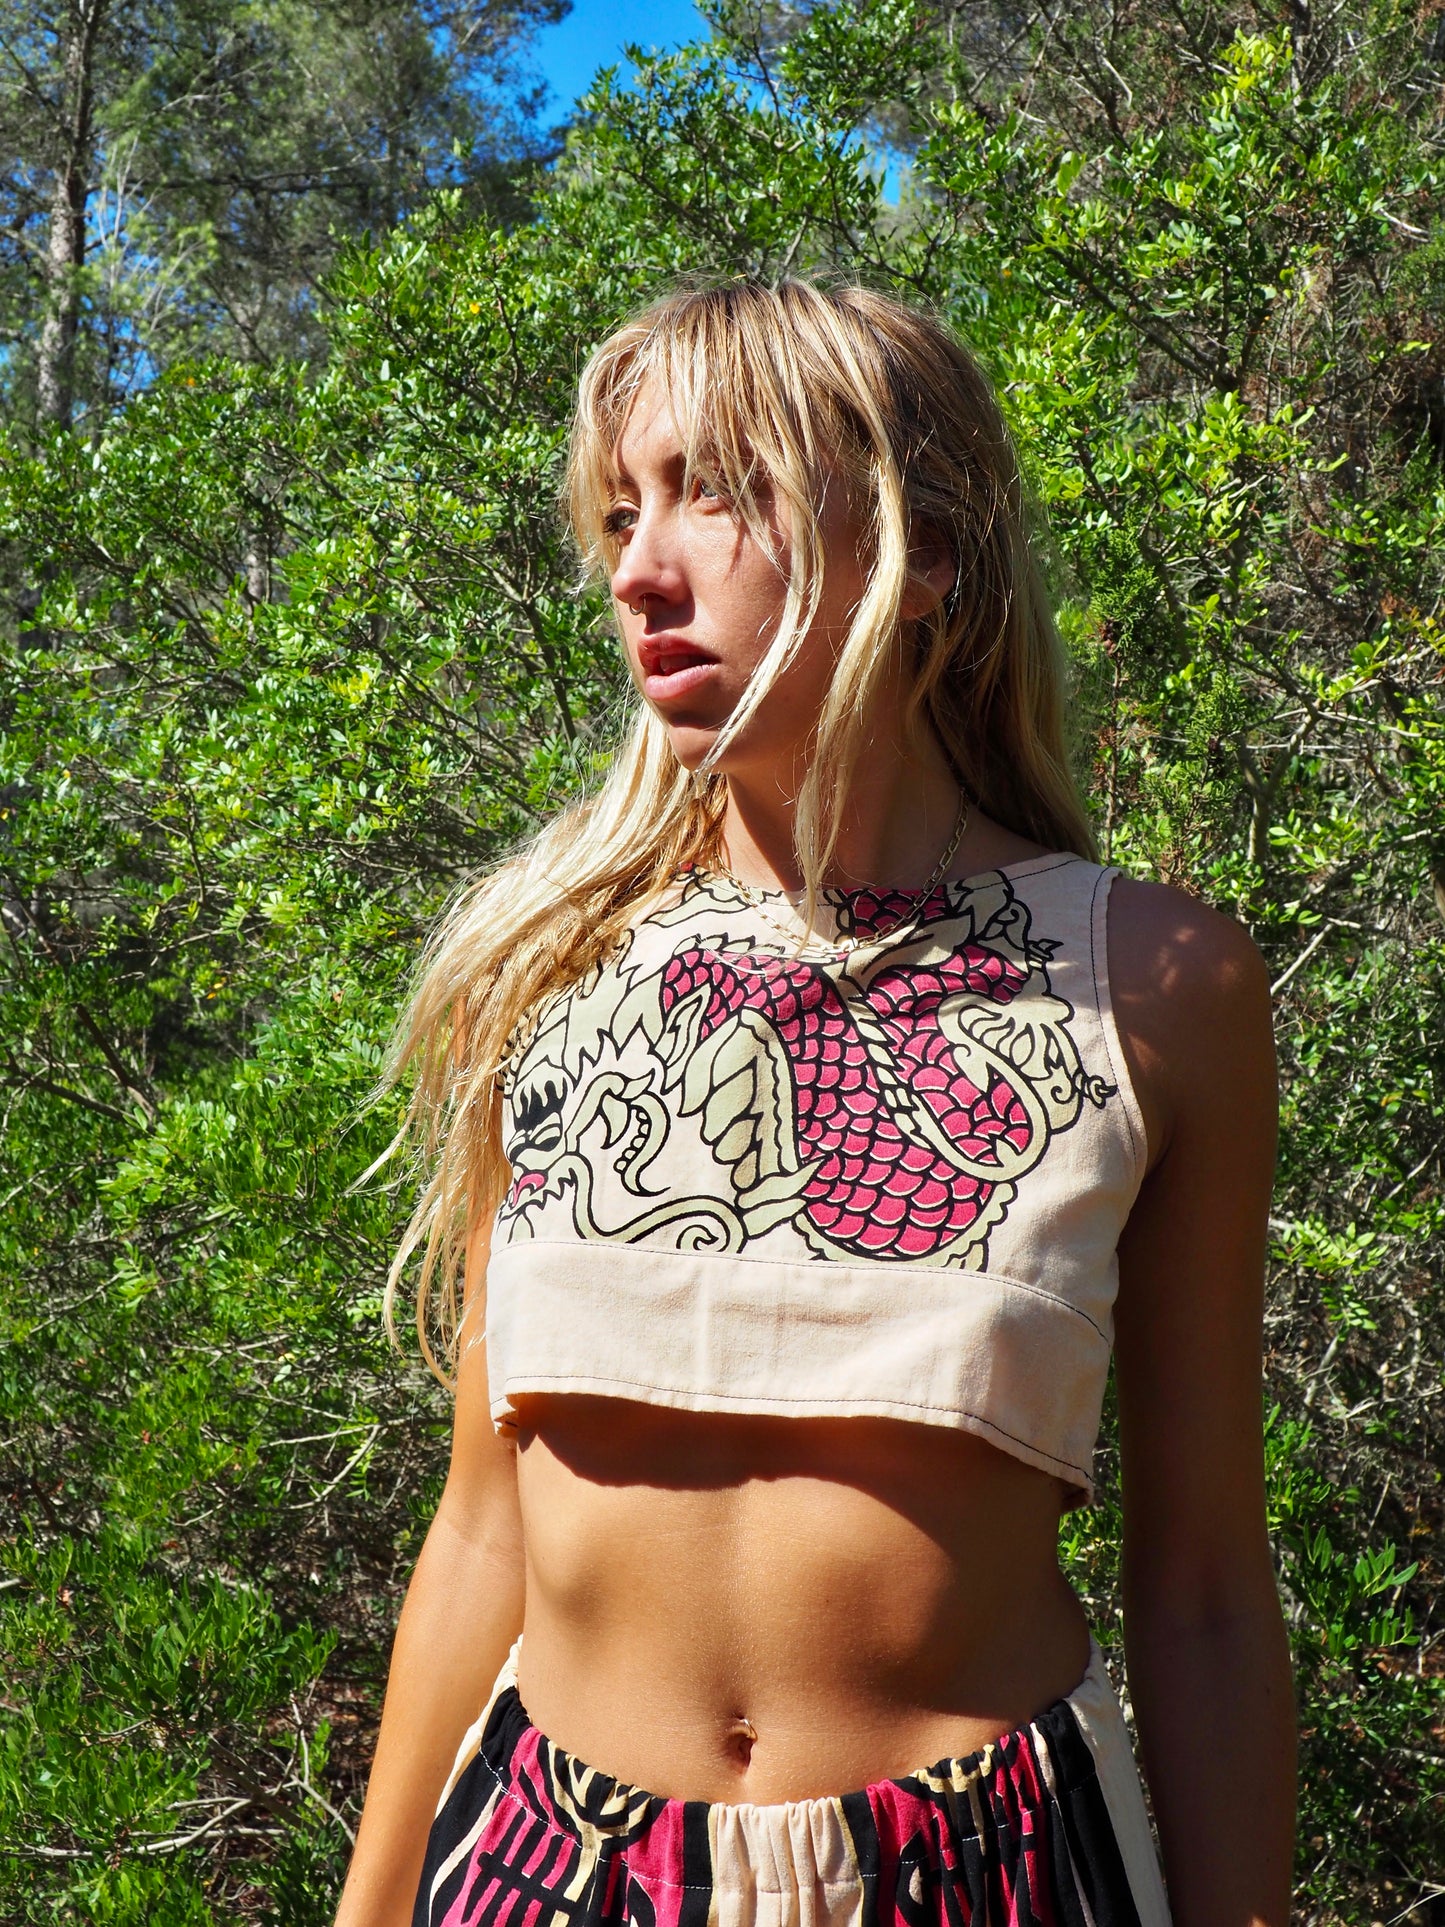 Up-cycled cotton Crop top only pants also available with dragon design by Vagabond Ibiza made